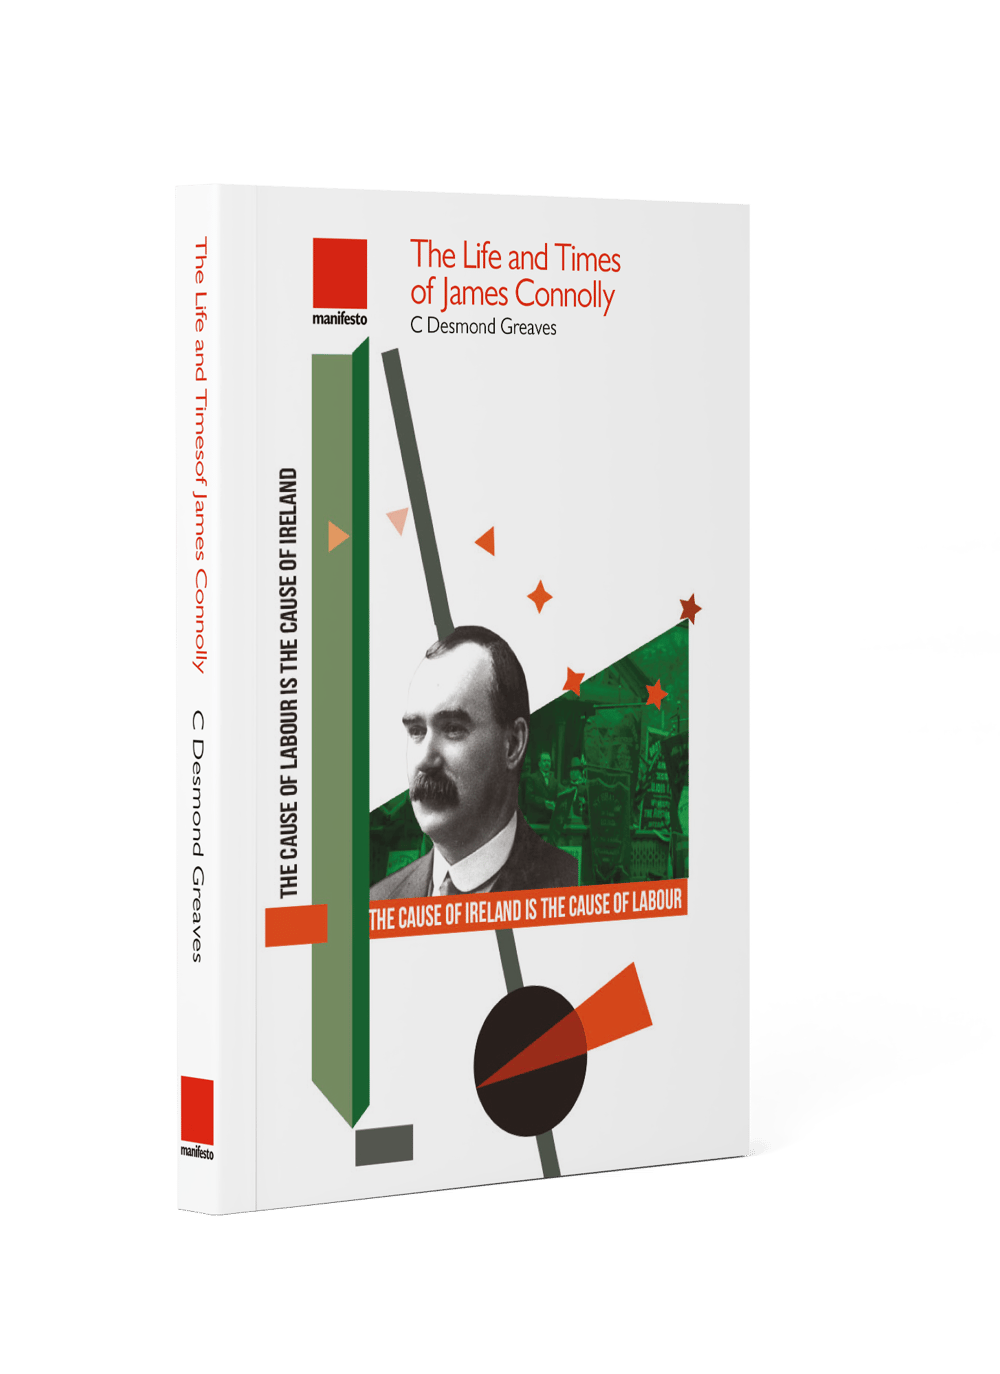 The life and times of James Connolly